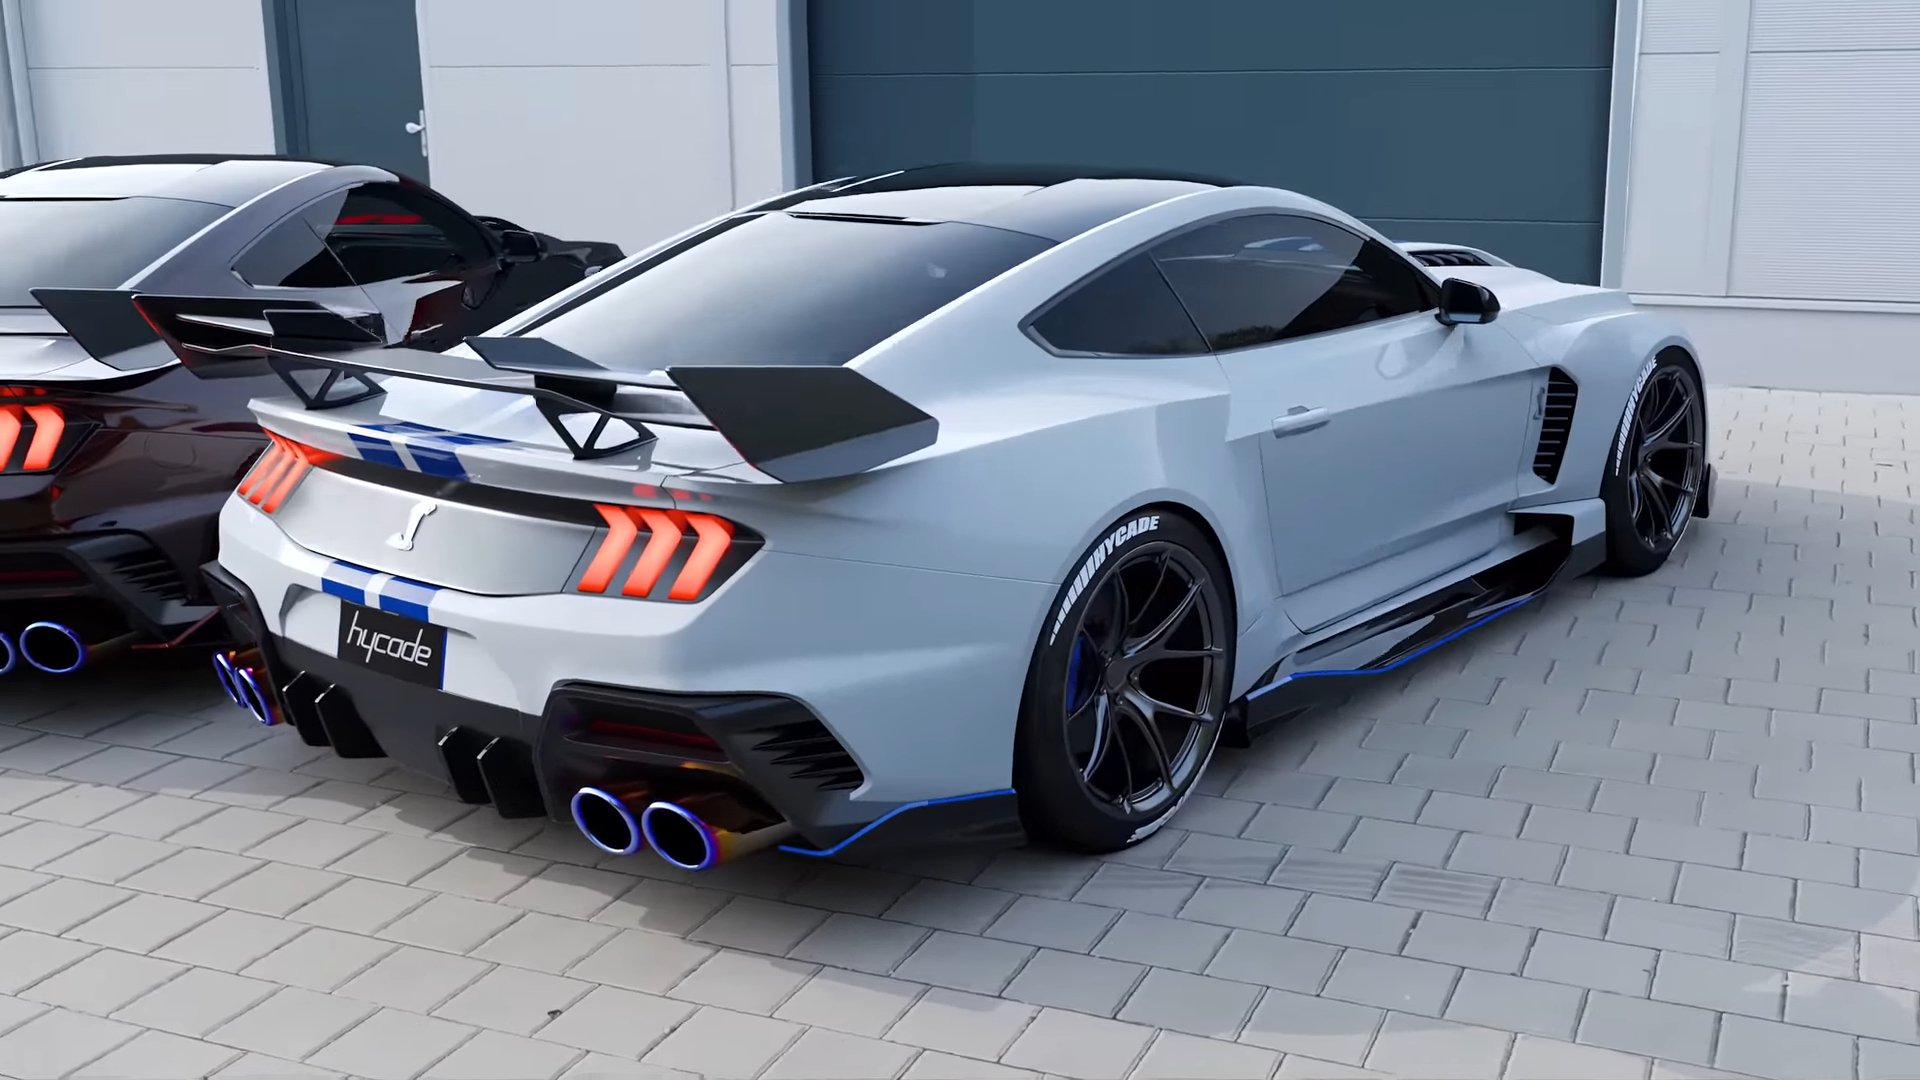 Ford Mustang 2024 Custom Body Kit by Hycade